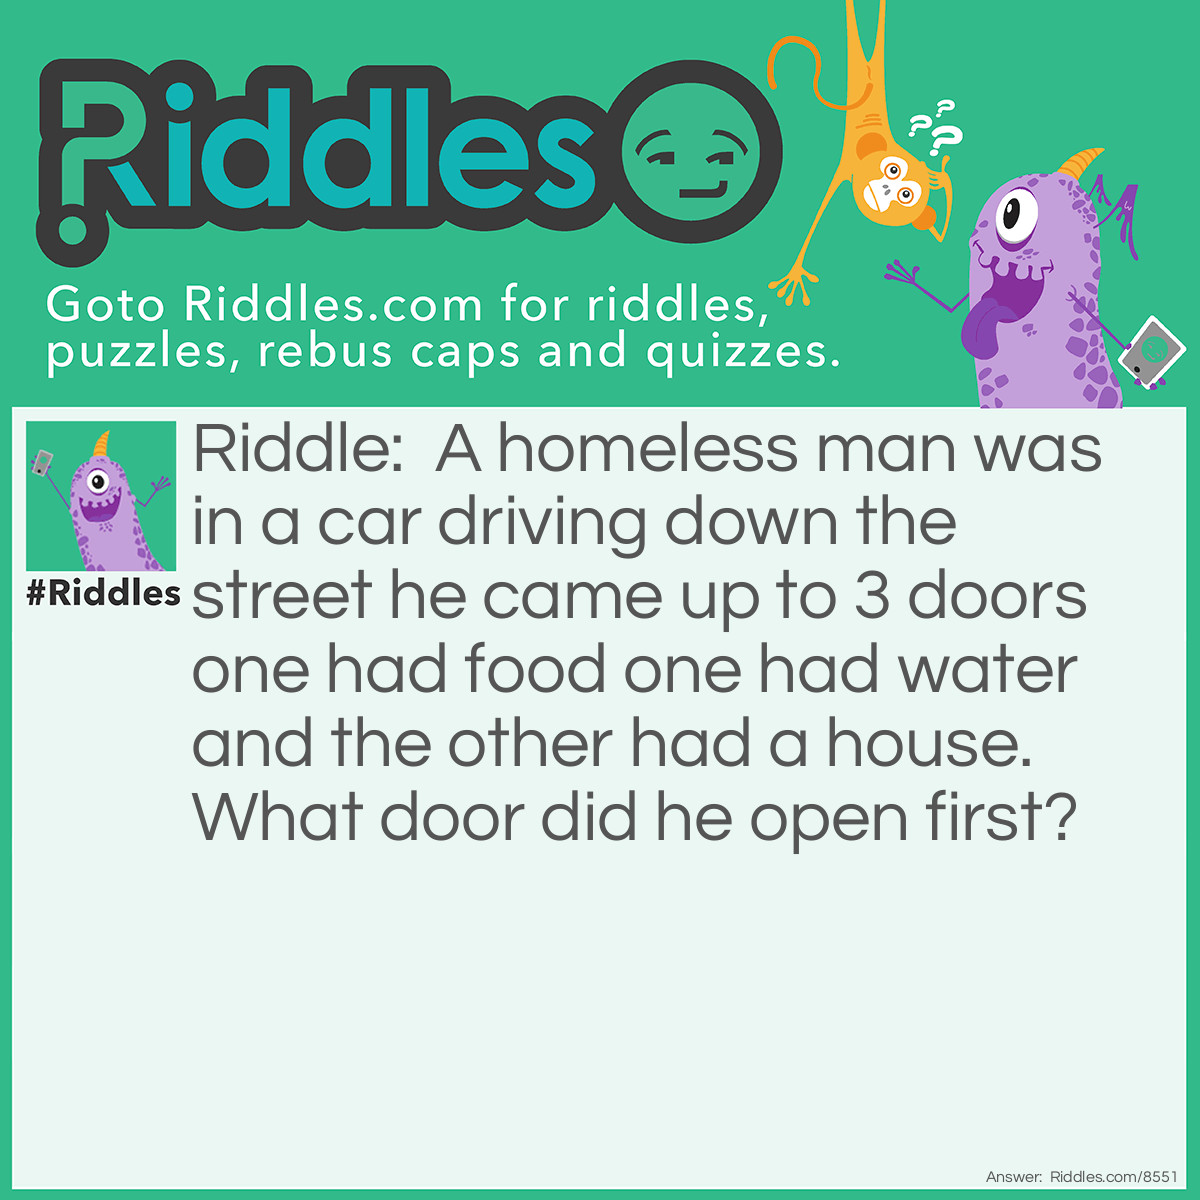 Riddle: A homeless man was in a car driving down the street he came up to 3 doors one had food one had water and the other had a house. What door did he open first? Answer: The car door.